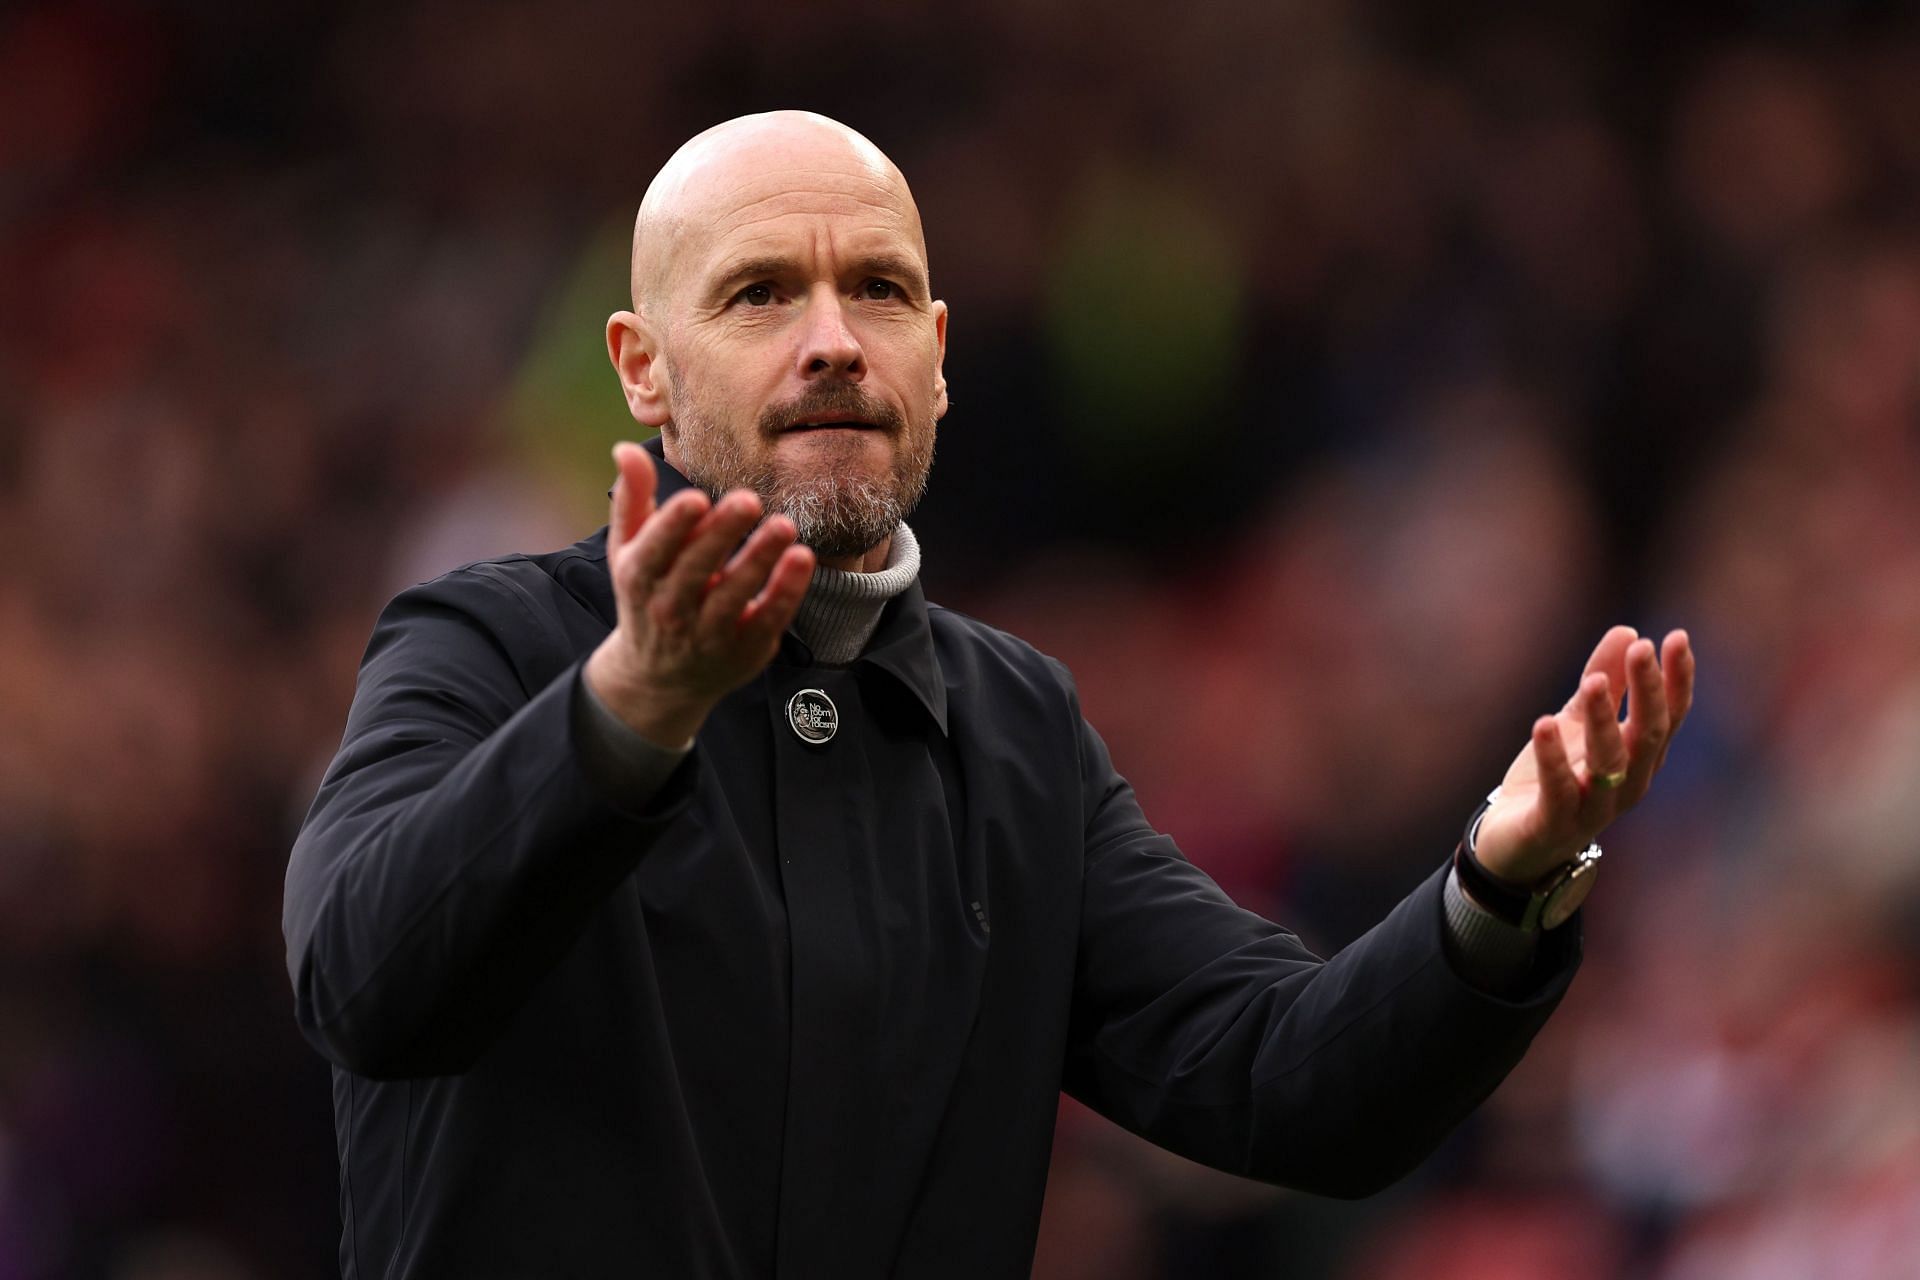 Erik ten Hag says Manchester United will have to be at their best.